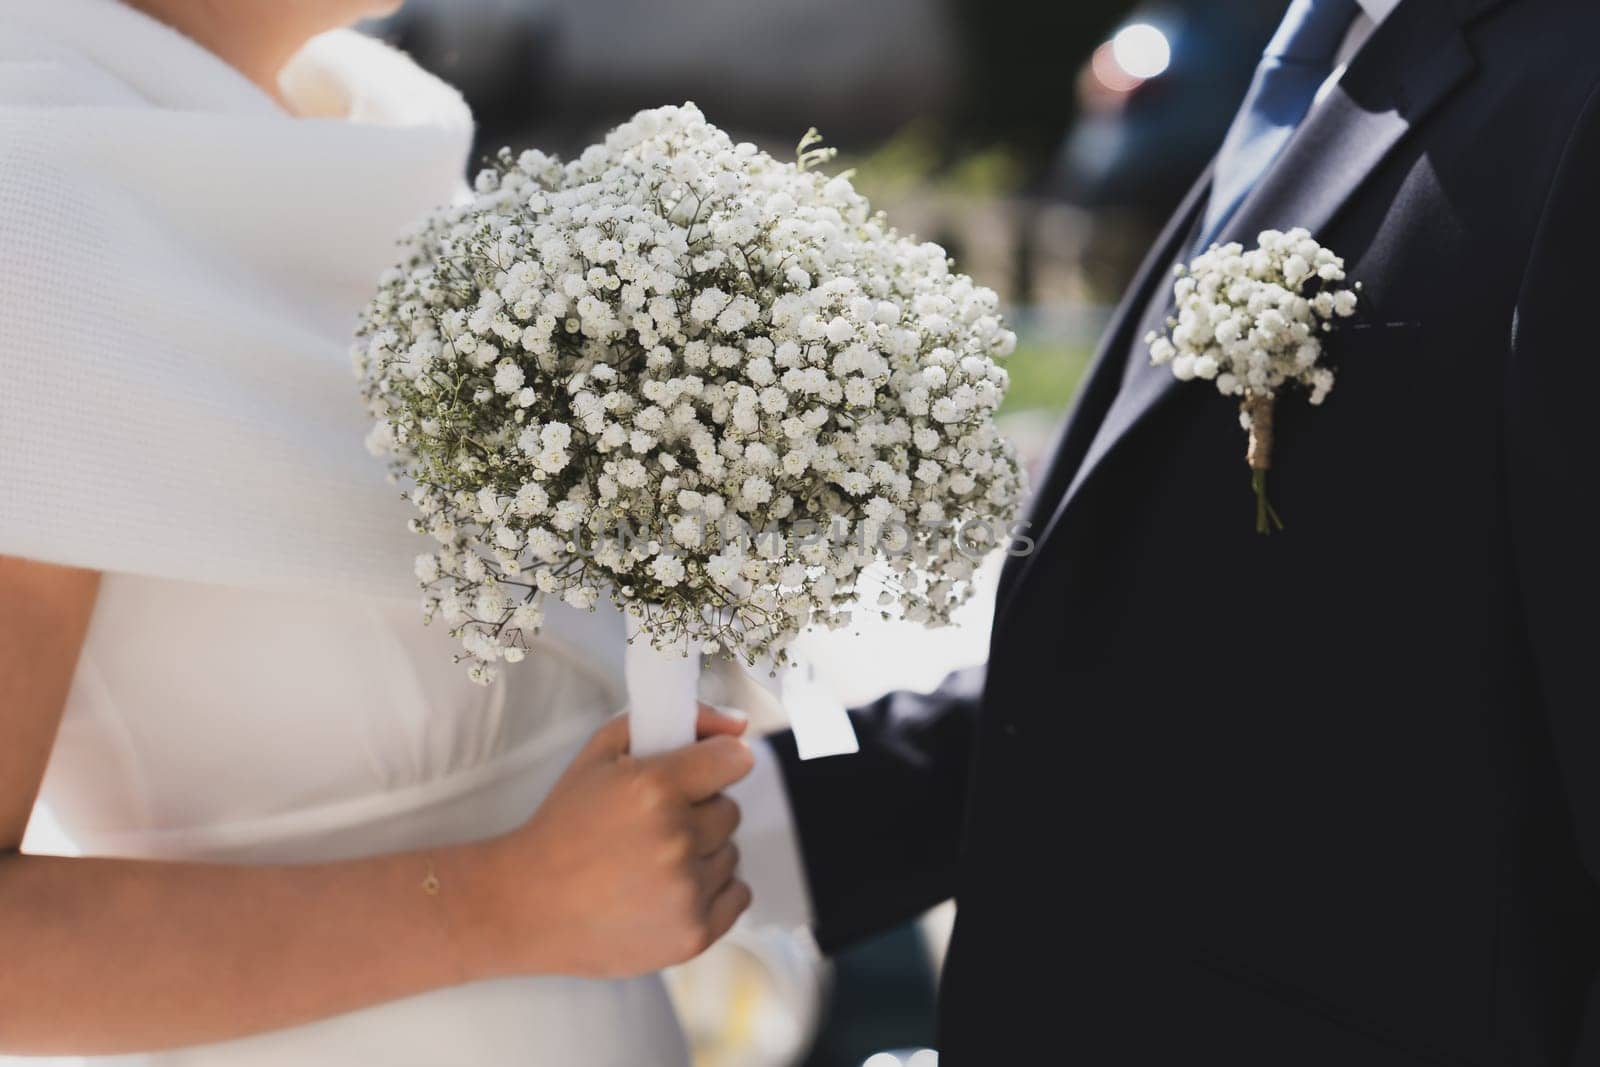 Bridal bouquet and a groom boutonniere of Gypsophila by Godi